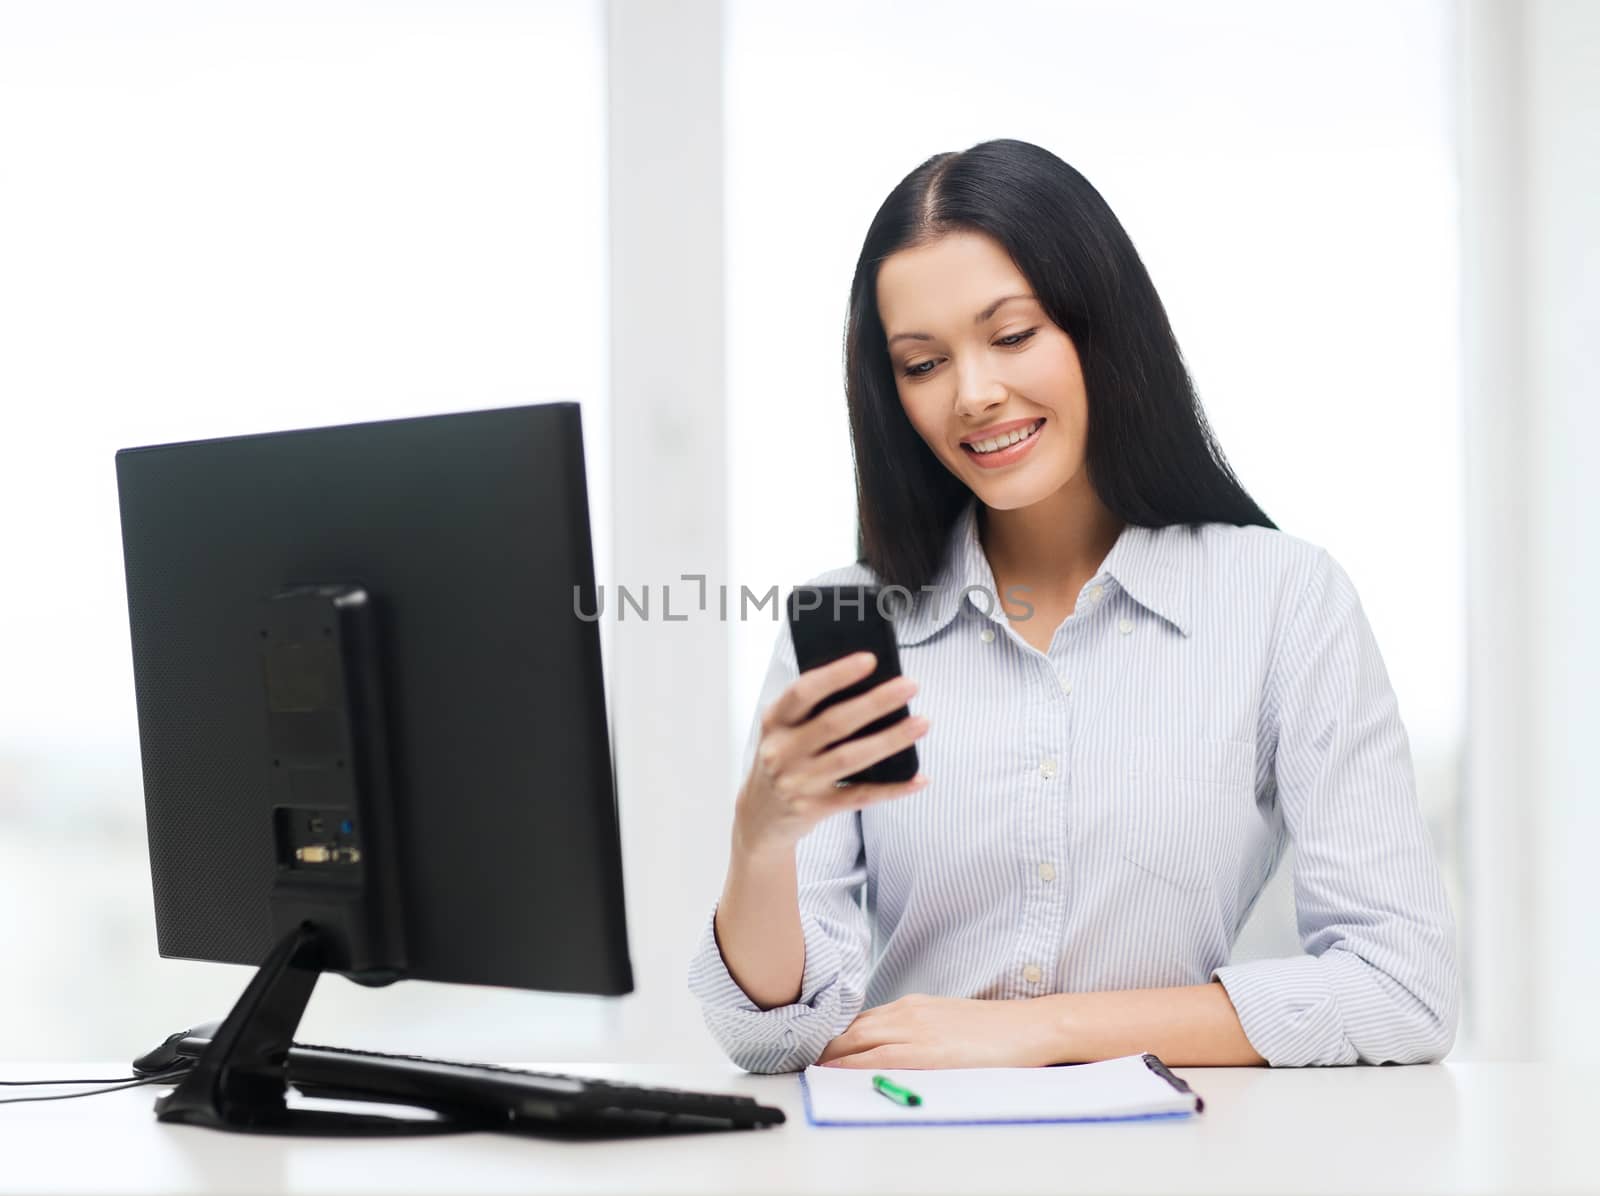 education, school, business, communication and technology concept - smiling businesswoman or student with computer and smartphone texting